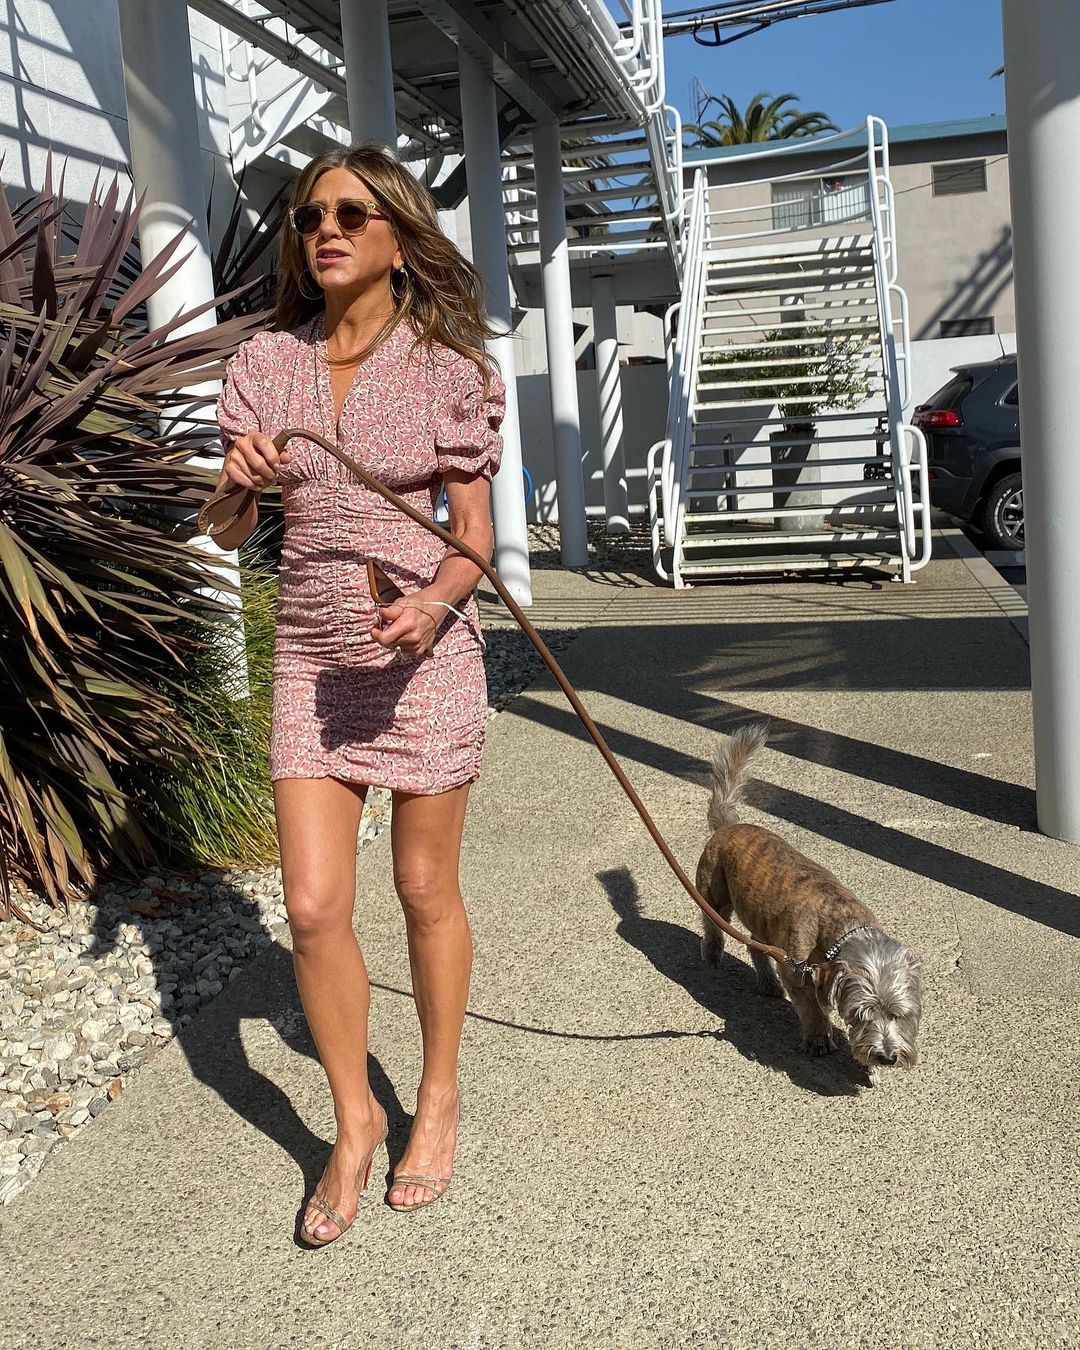 Jennifer Aniston taking her pet dog, Clyde, on a walk to work